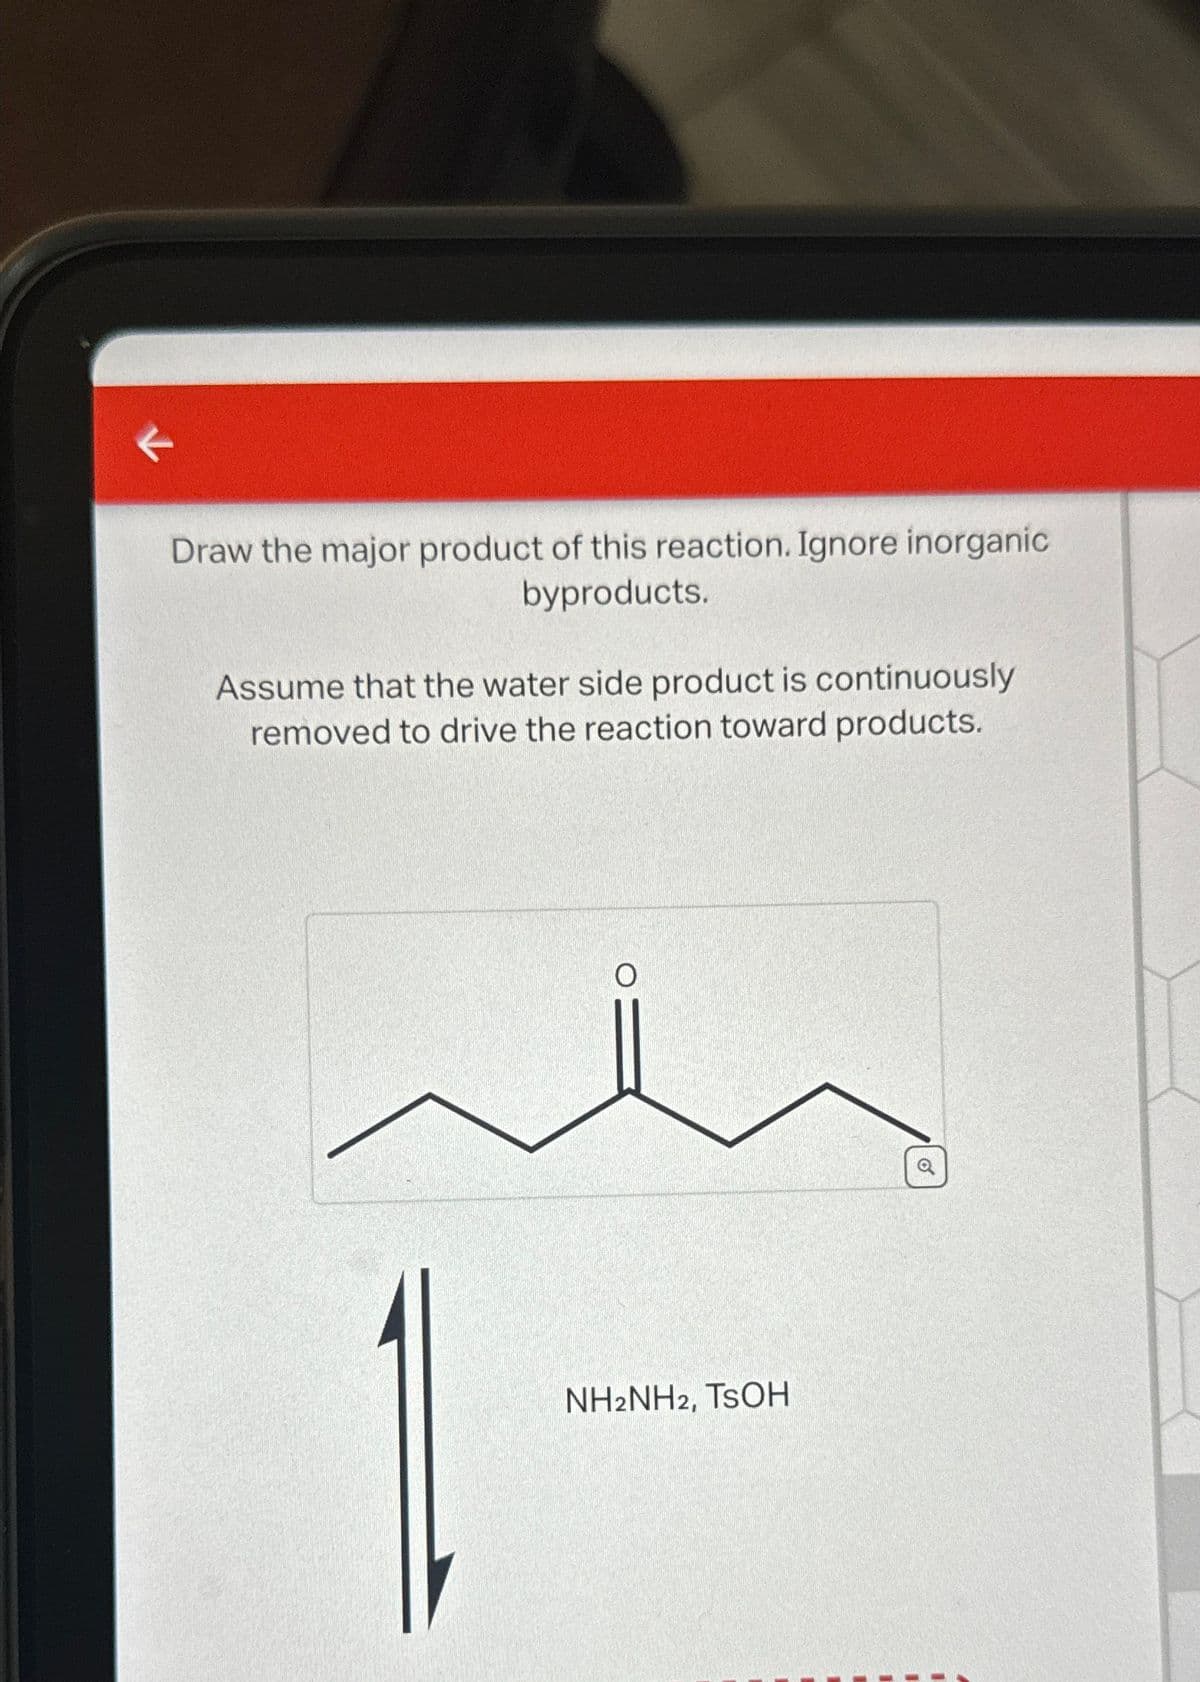 <
Draw the major product of this reaction. Ignore inorganic
byproducts.
Assume that the water side product is continuously
removed to drive the reaction toward products.
O
NH2NH2, TSOH
o